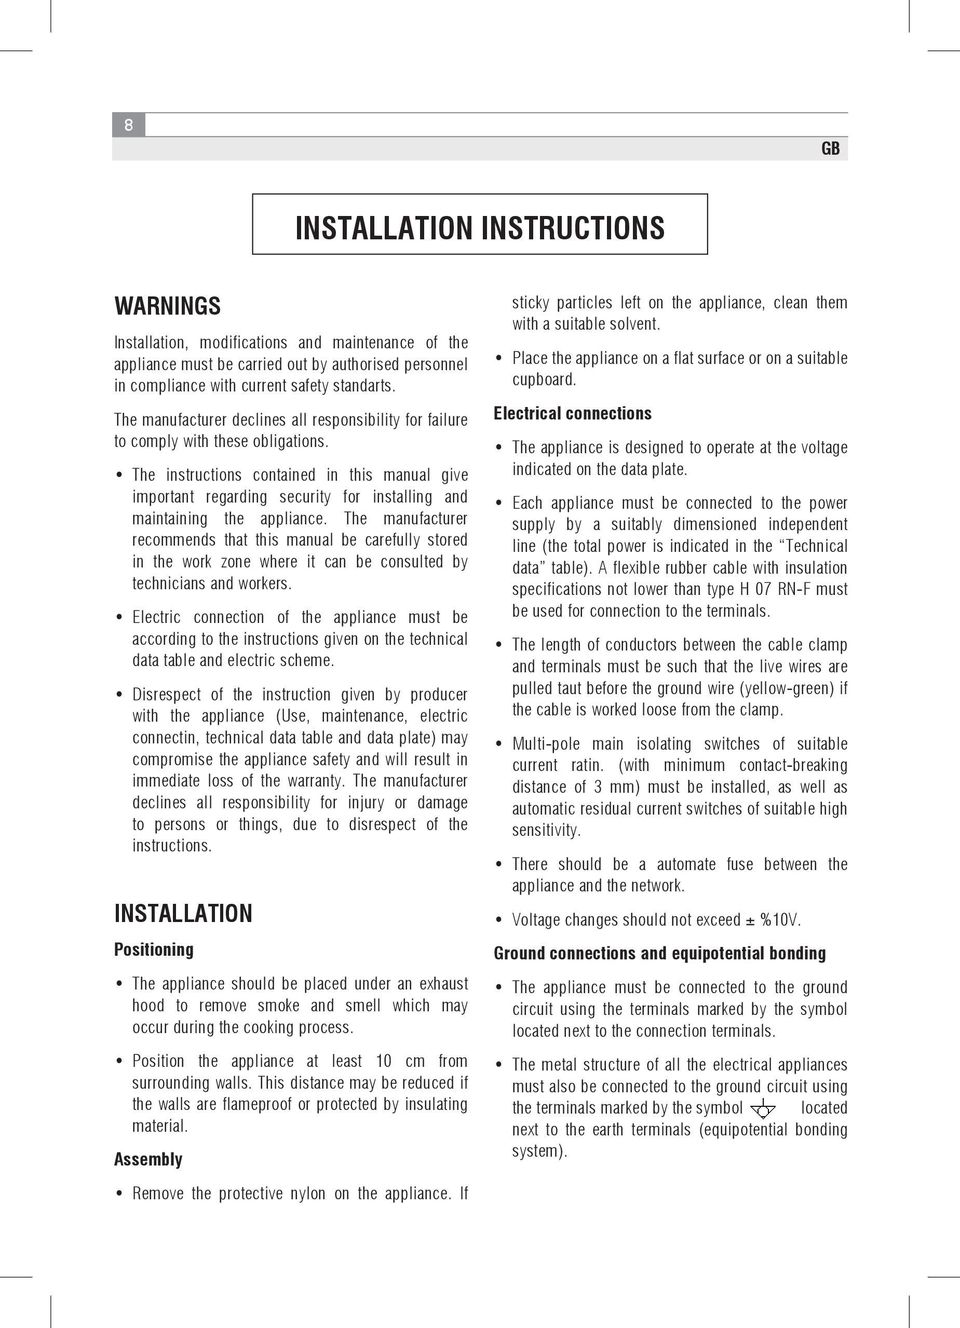 The instructions contained in this manual give important regarding security for installing and maintaining the appliance.